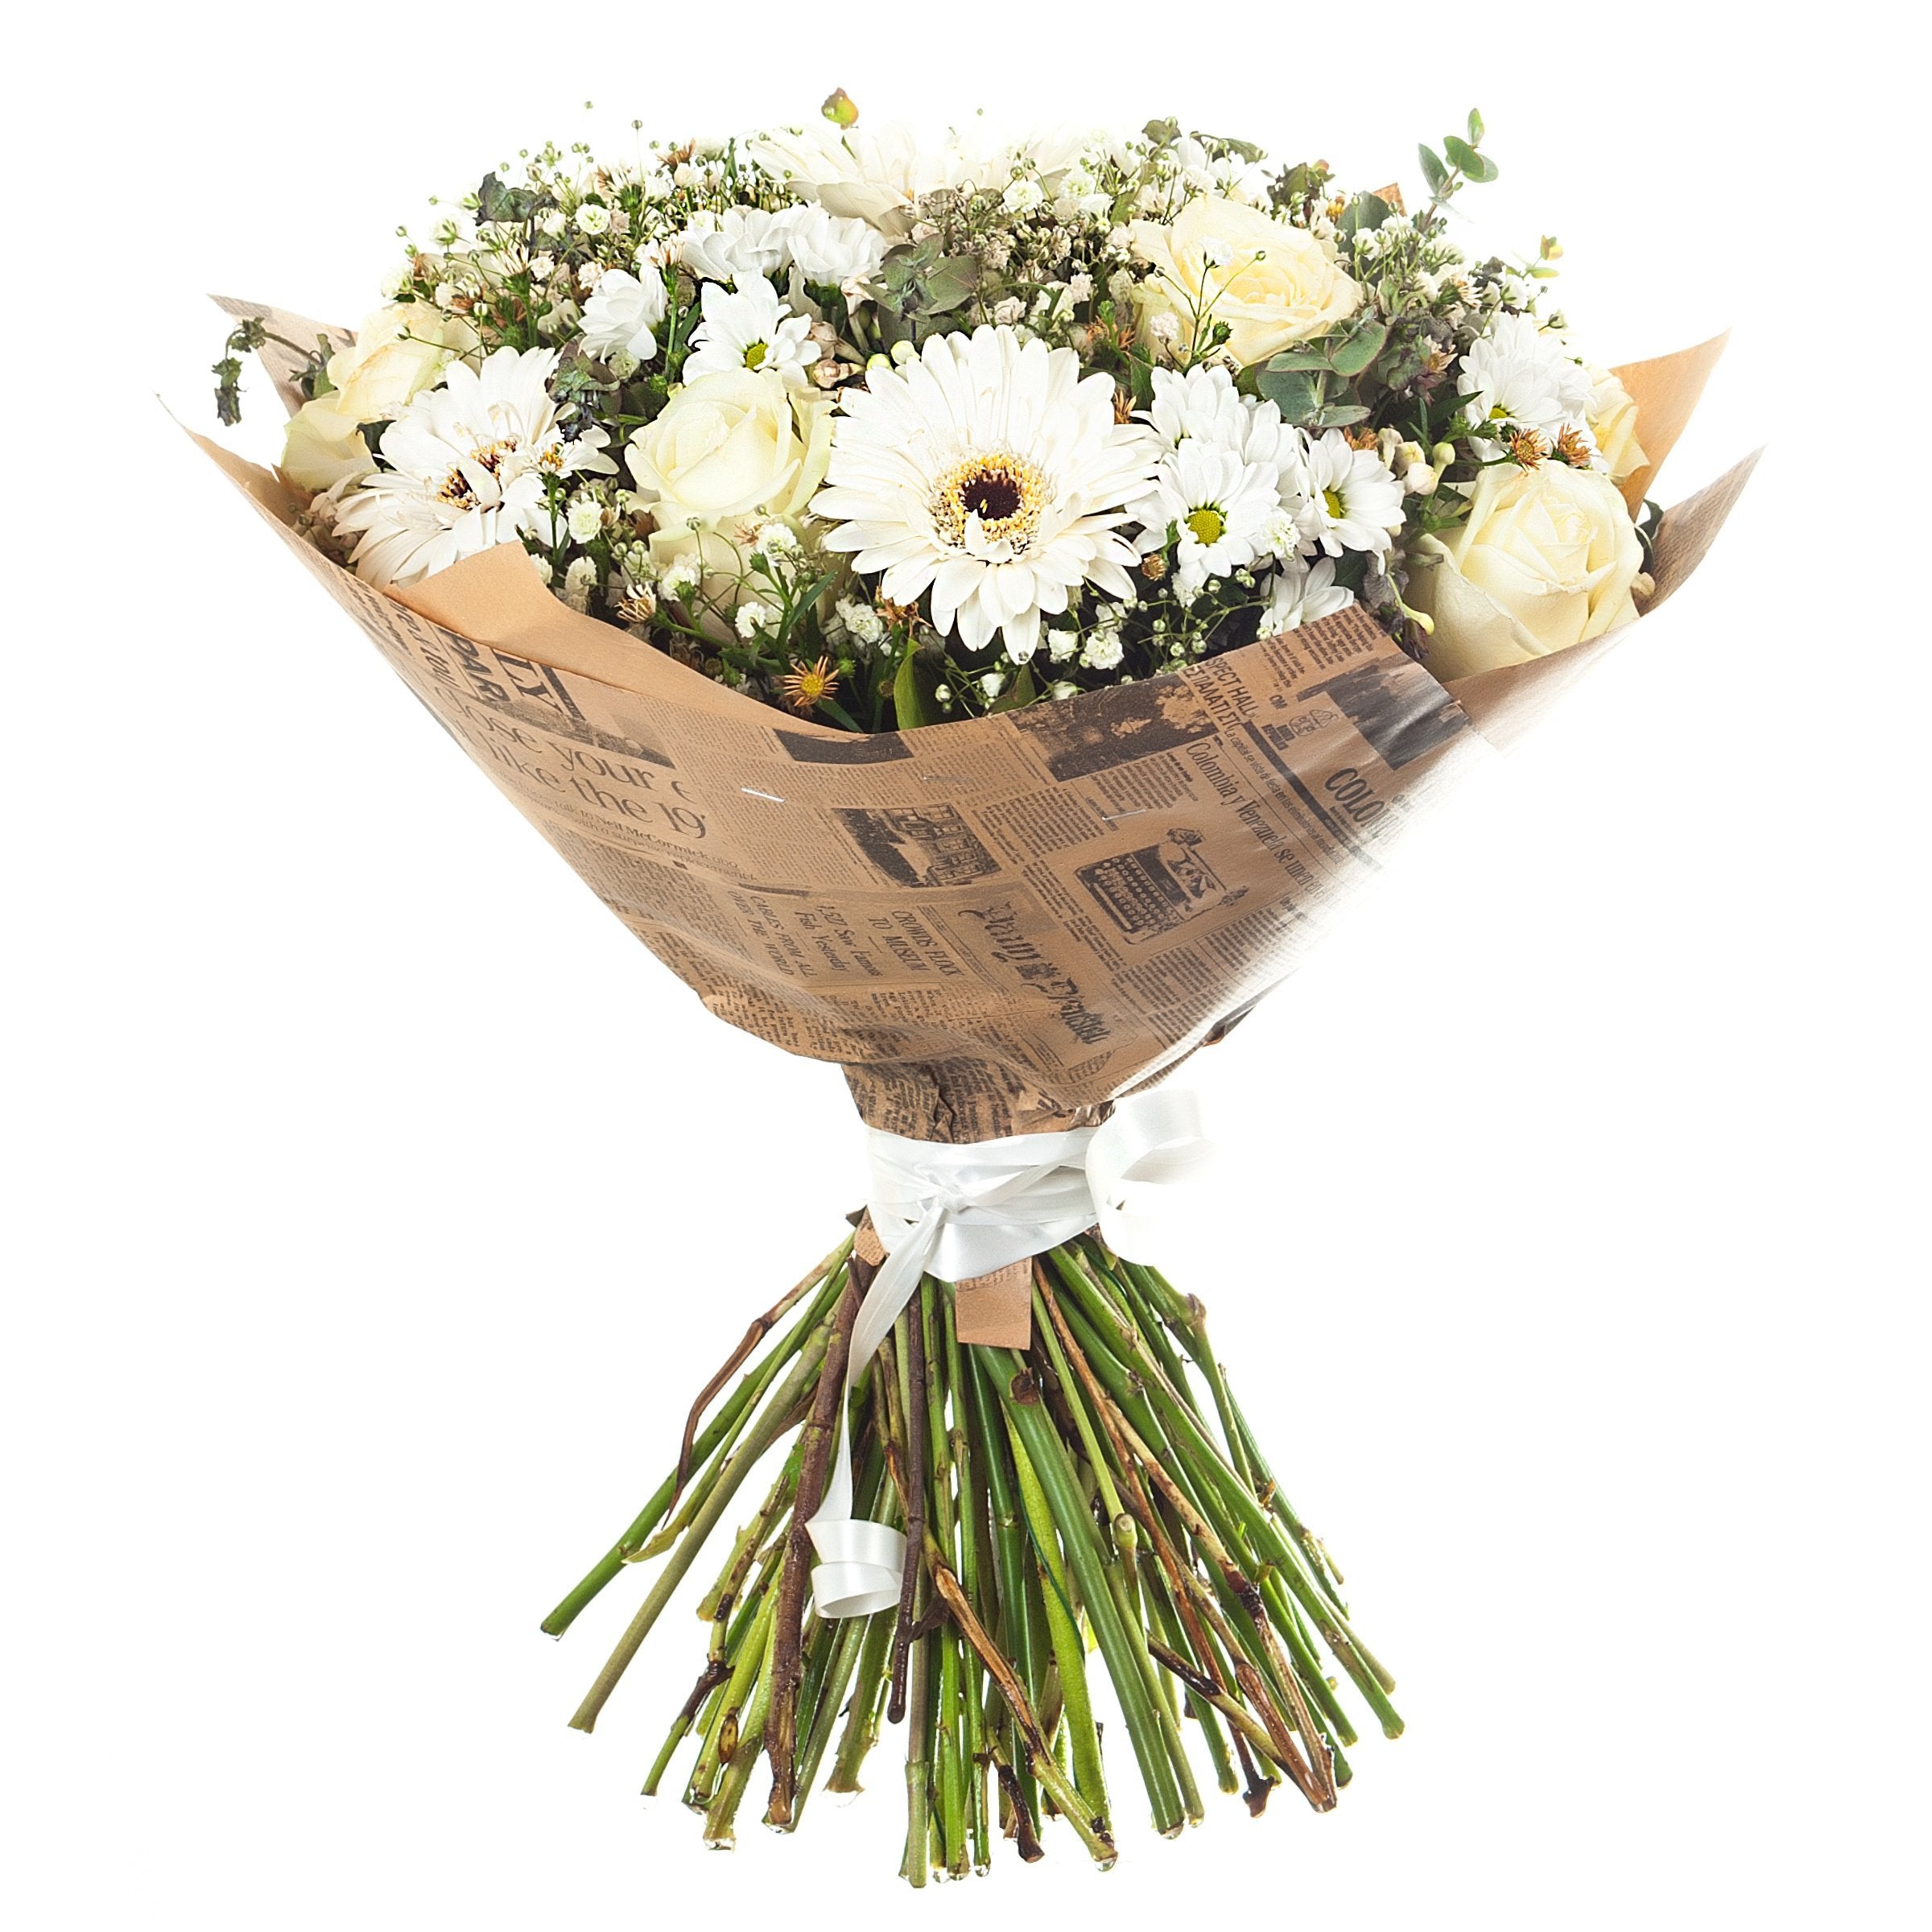 Sympathy Flower Bouquets with Same Day Flower Delivery Dublin or Next Day Flower Delivery Ireland